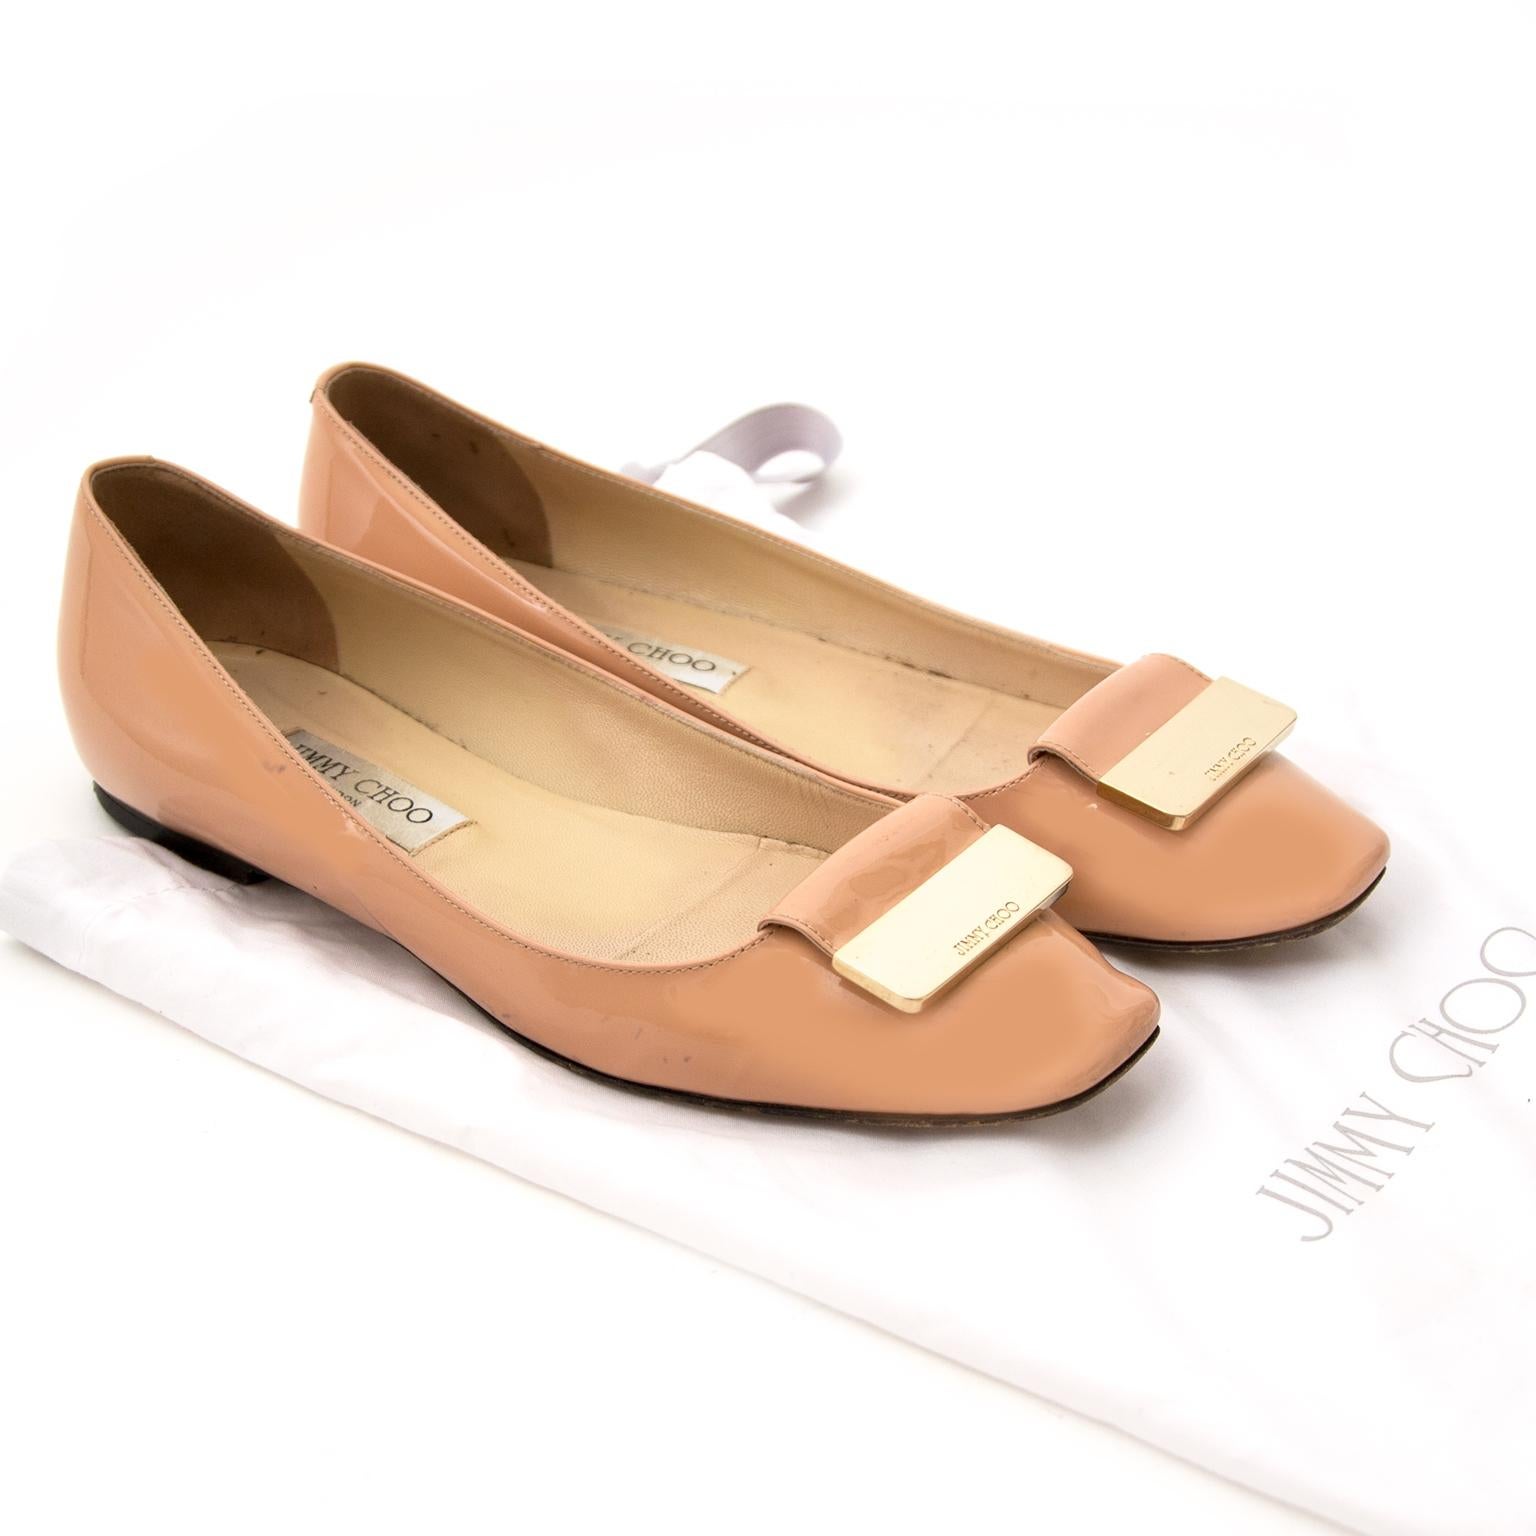 Very Good Preloved Condition

Jimmy Choo Nude Patent Ballet Flats

Ballet flats are a classic and comfortabe way to leave the house. This pair by Jimmy Choo is made of nude patent leather and will add the 
On the tip, there is a beautiful gold logod